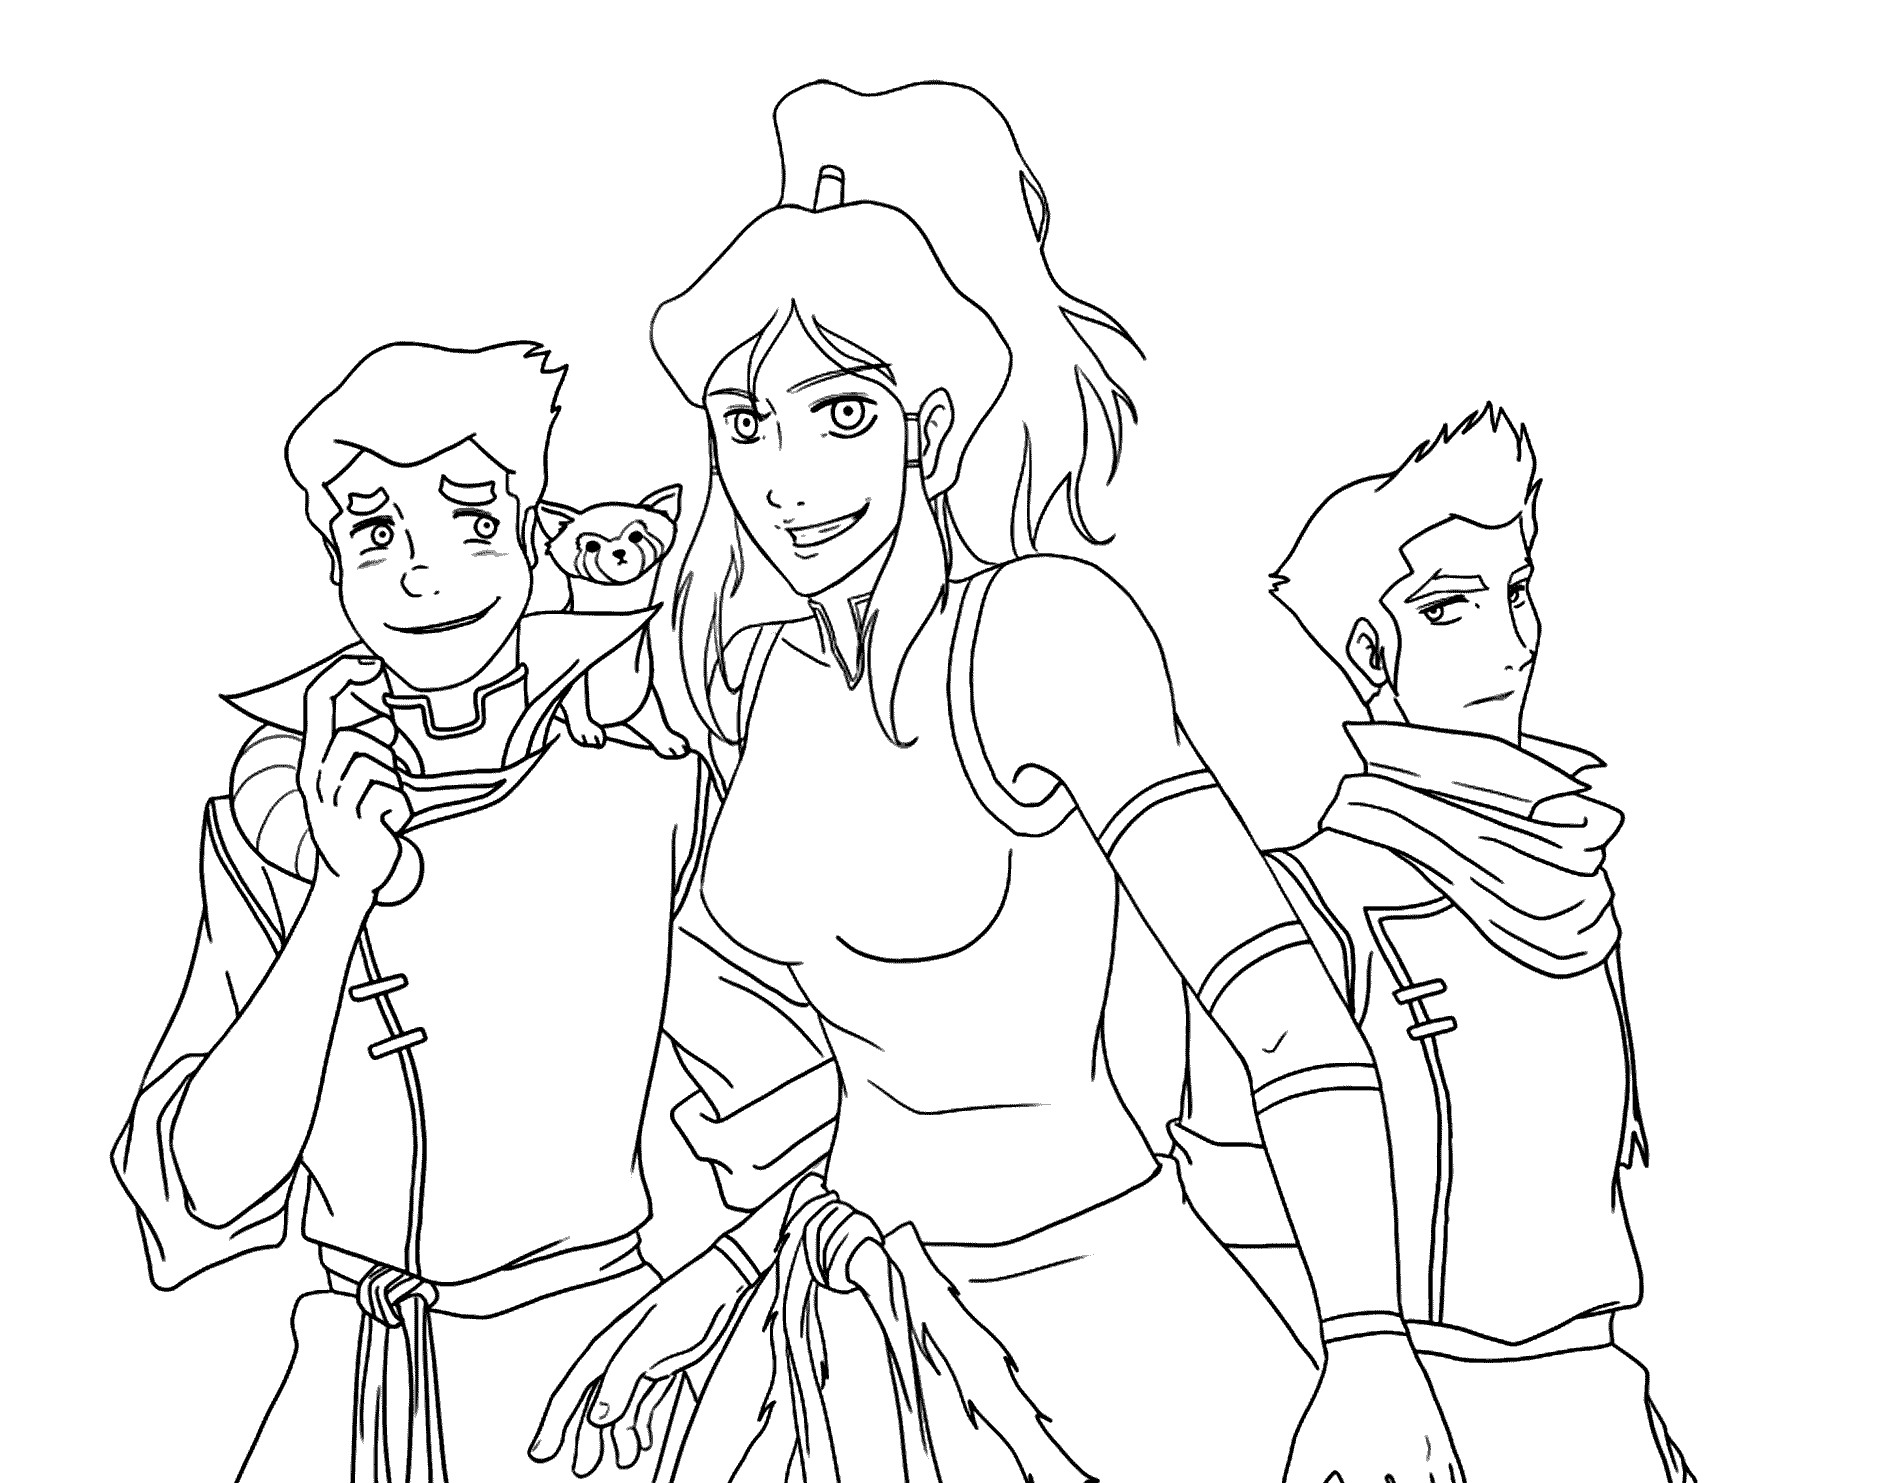 Korra and friends coloring pages for kids, printable free - The Legend of  Korra | Cartoon coloring pages, Coloring pages, Korra